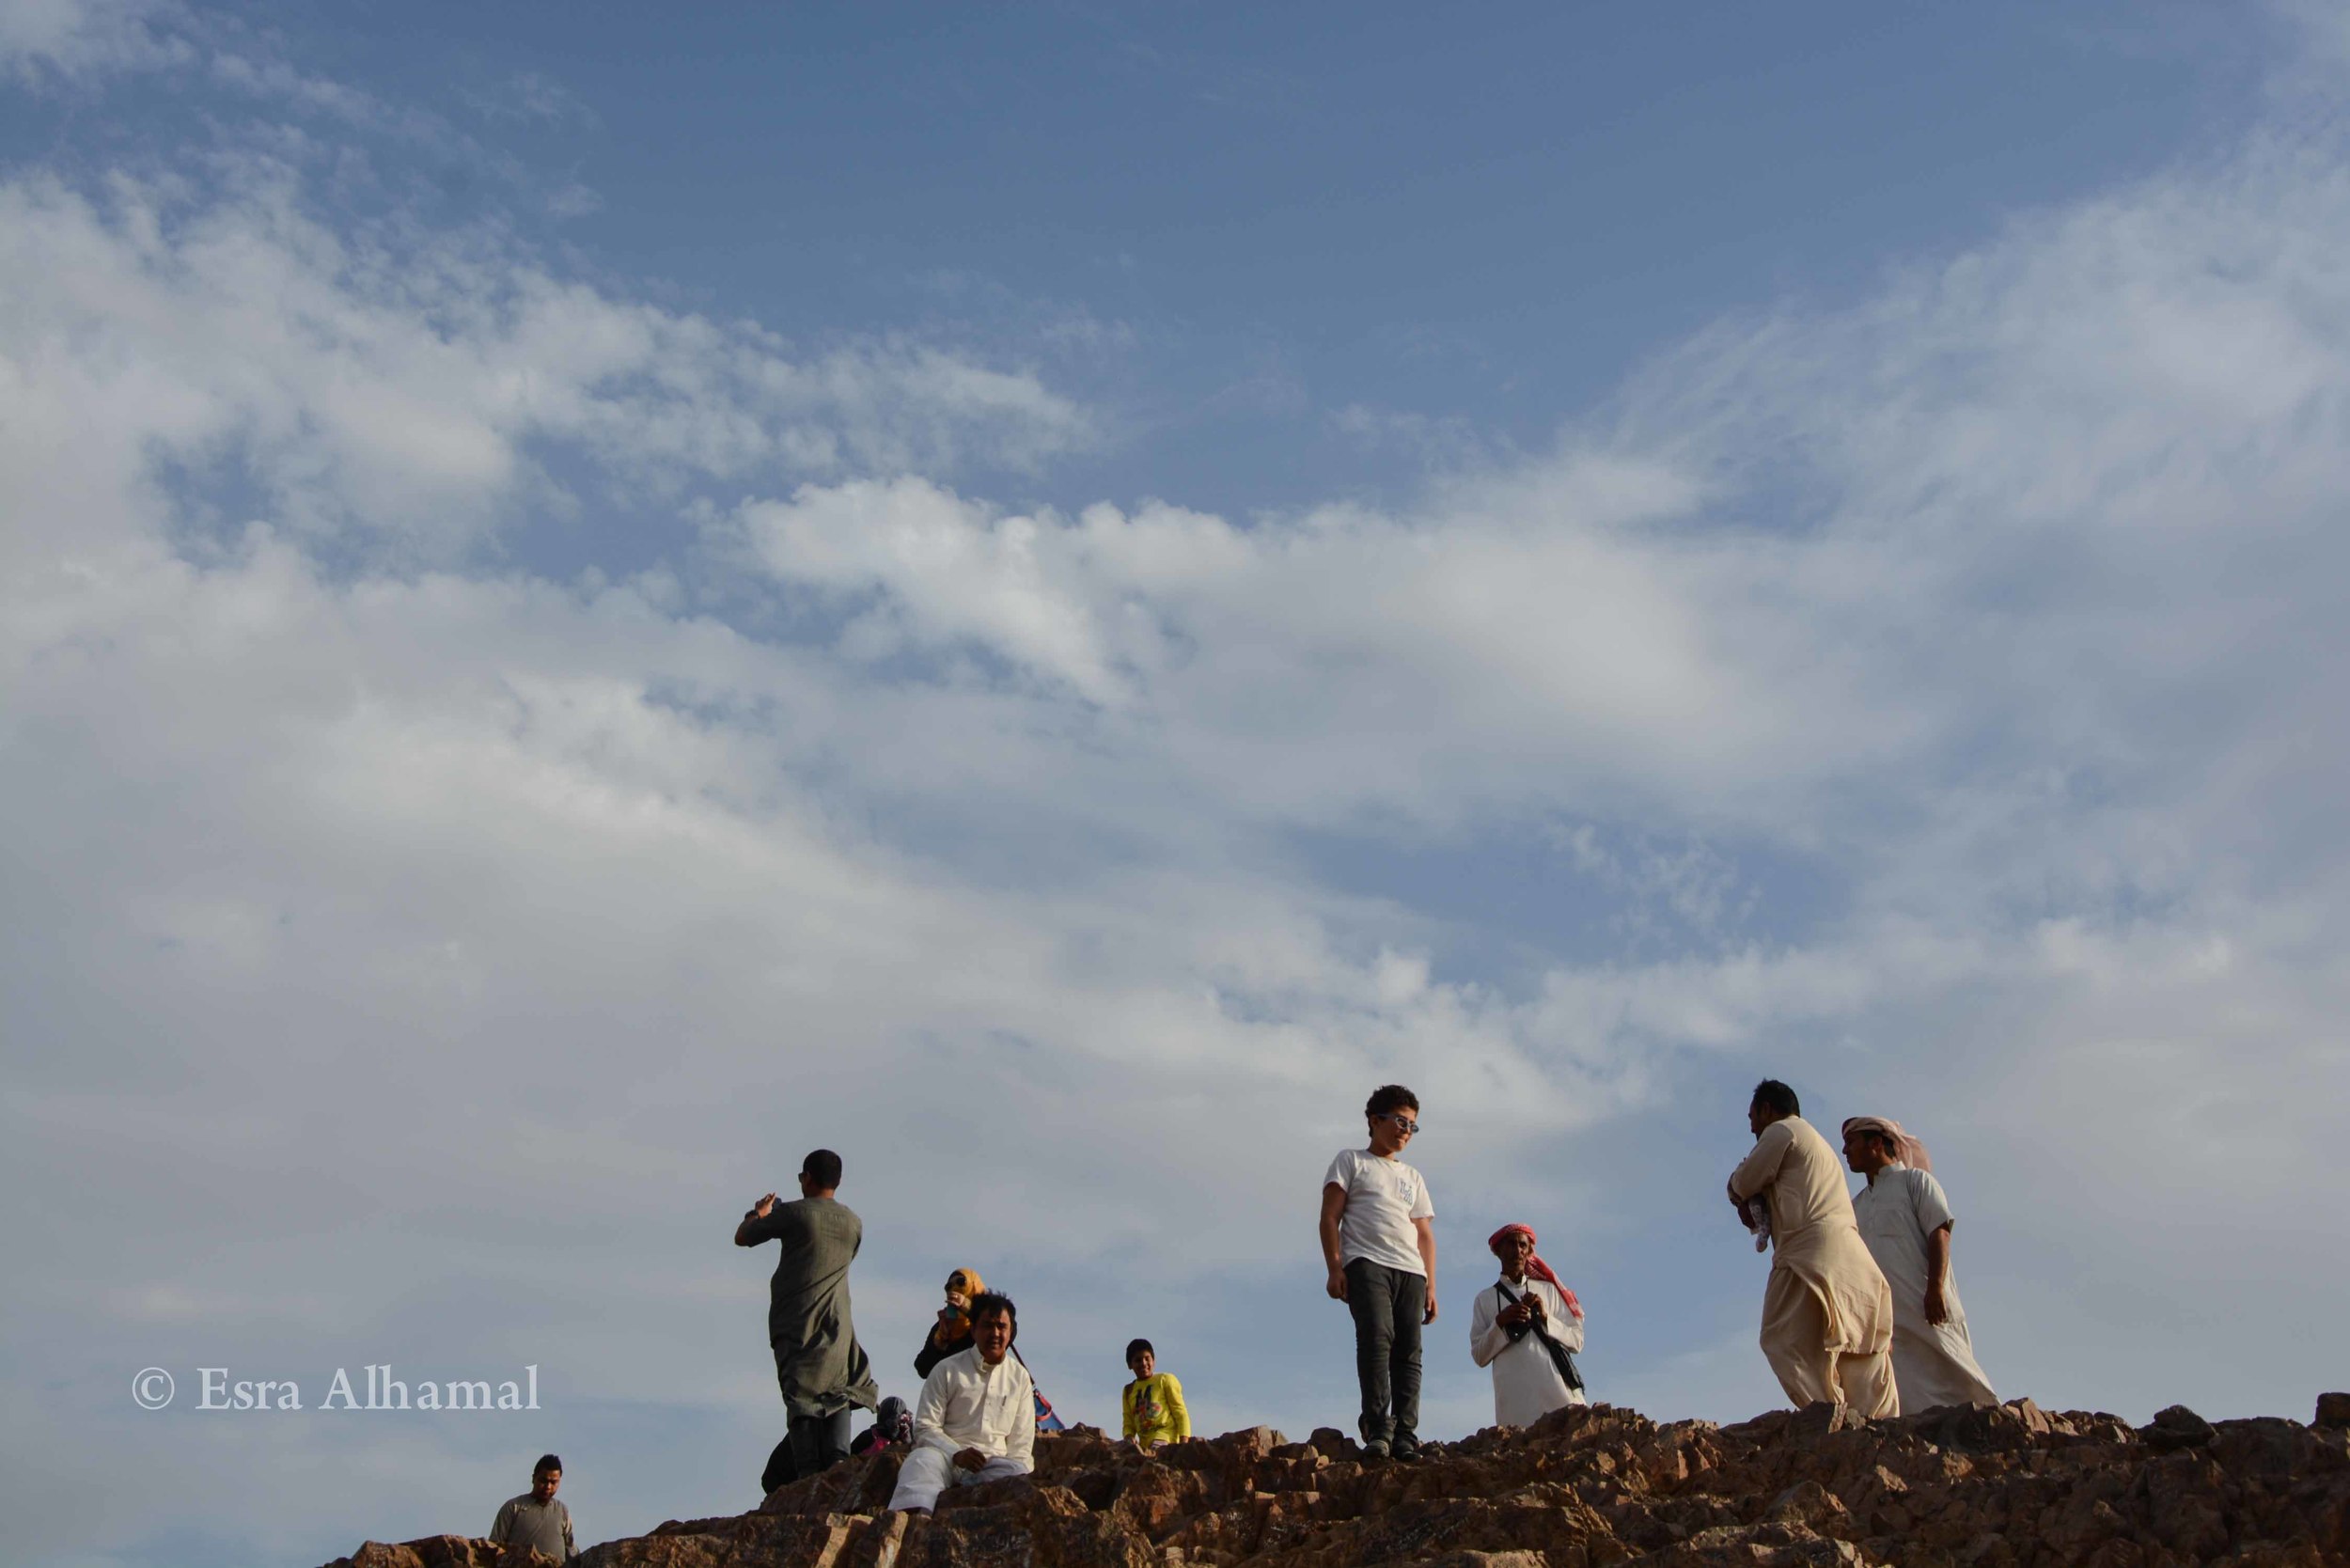 Children on top of the mountain in Medina